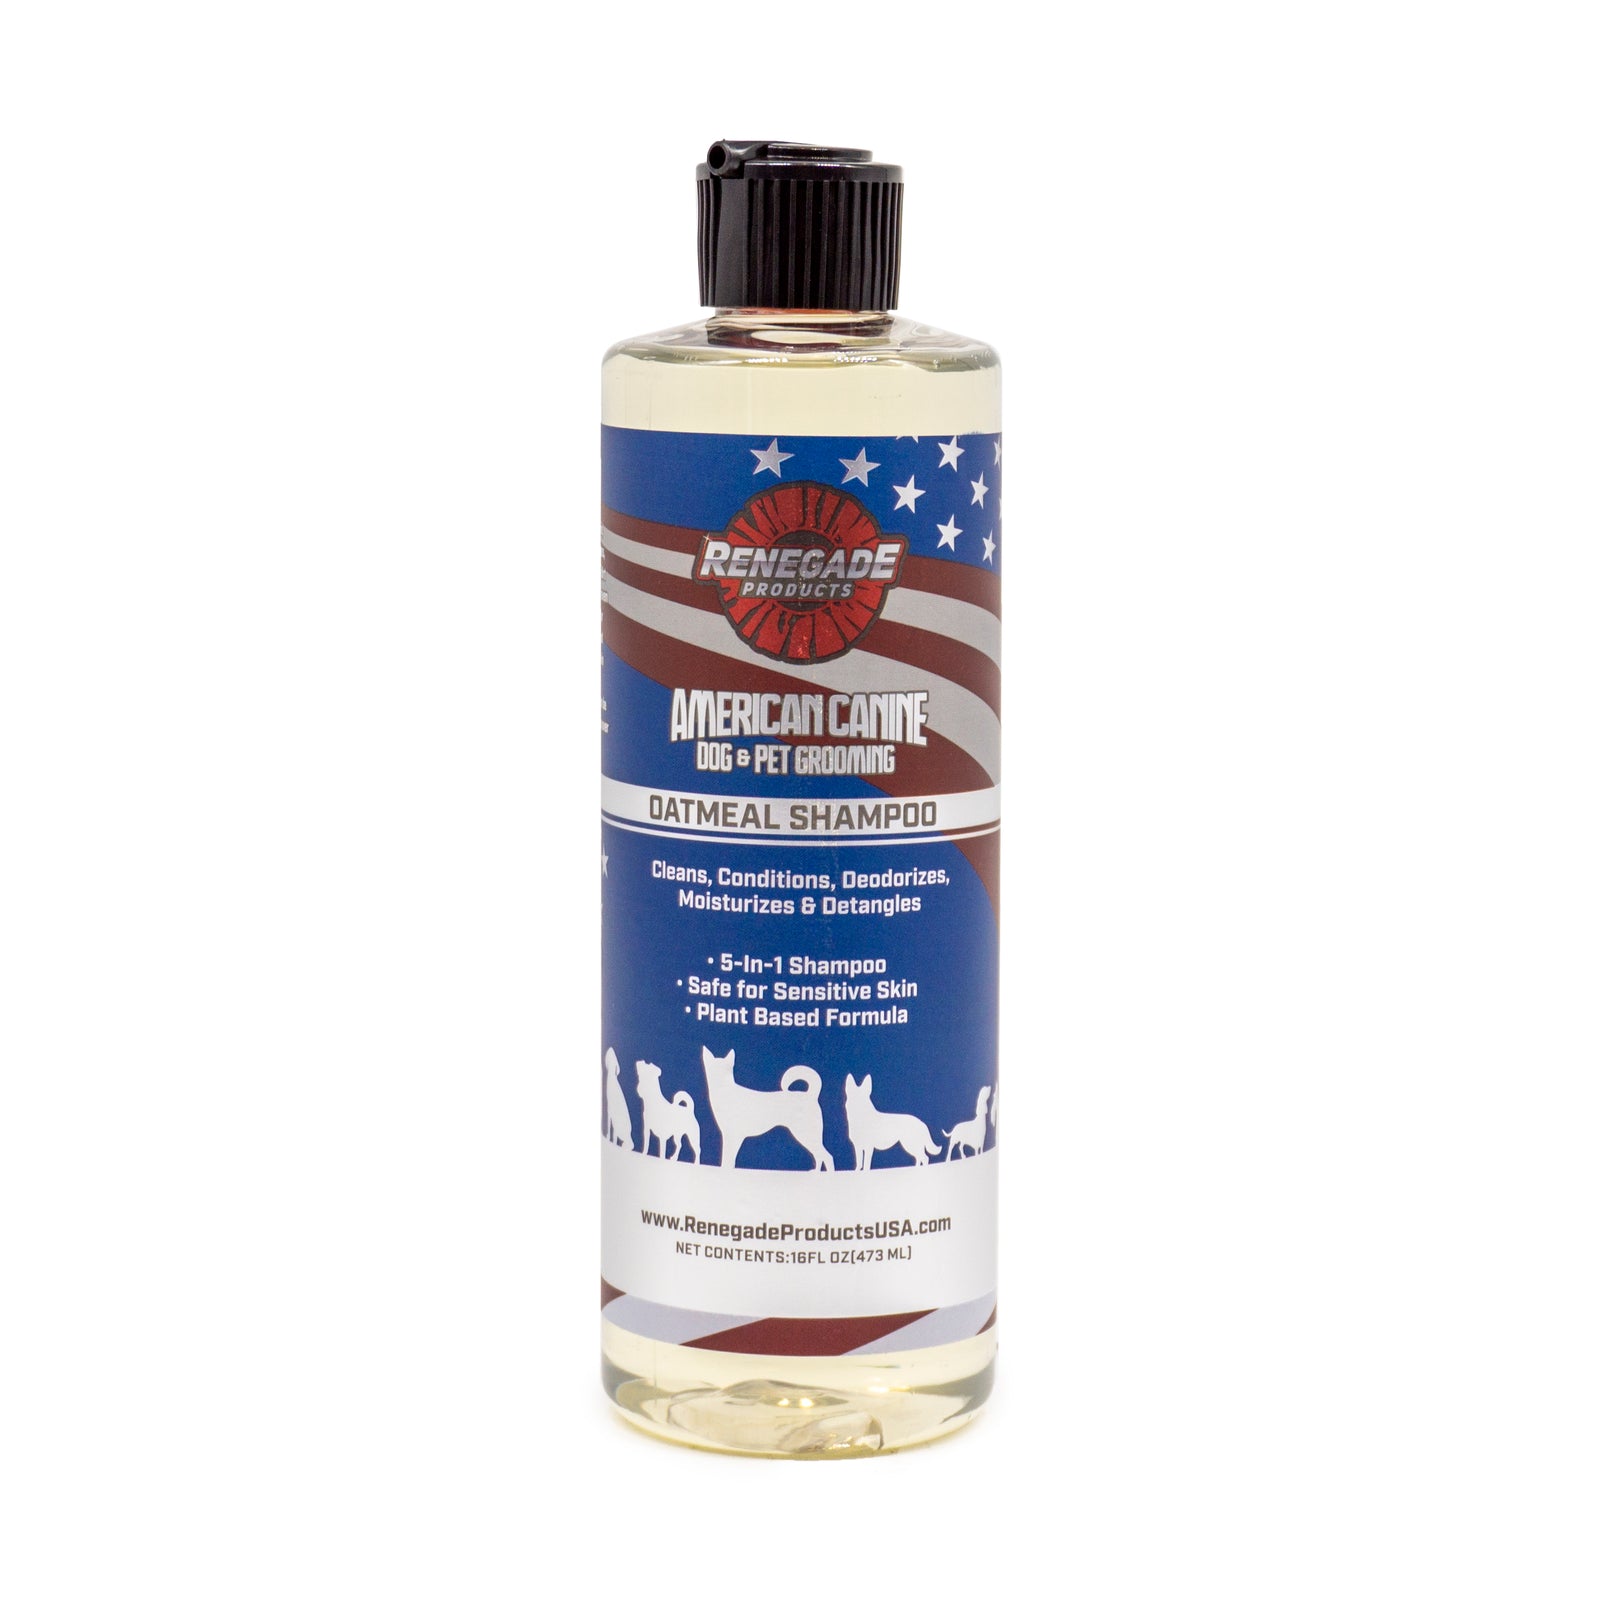 RENEGADE LVP CLEANER – Auto Detail Supply Pros